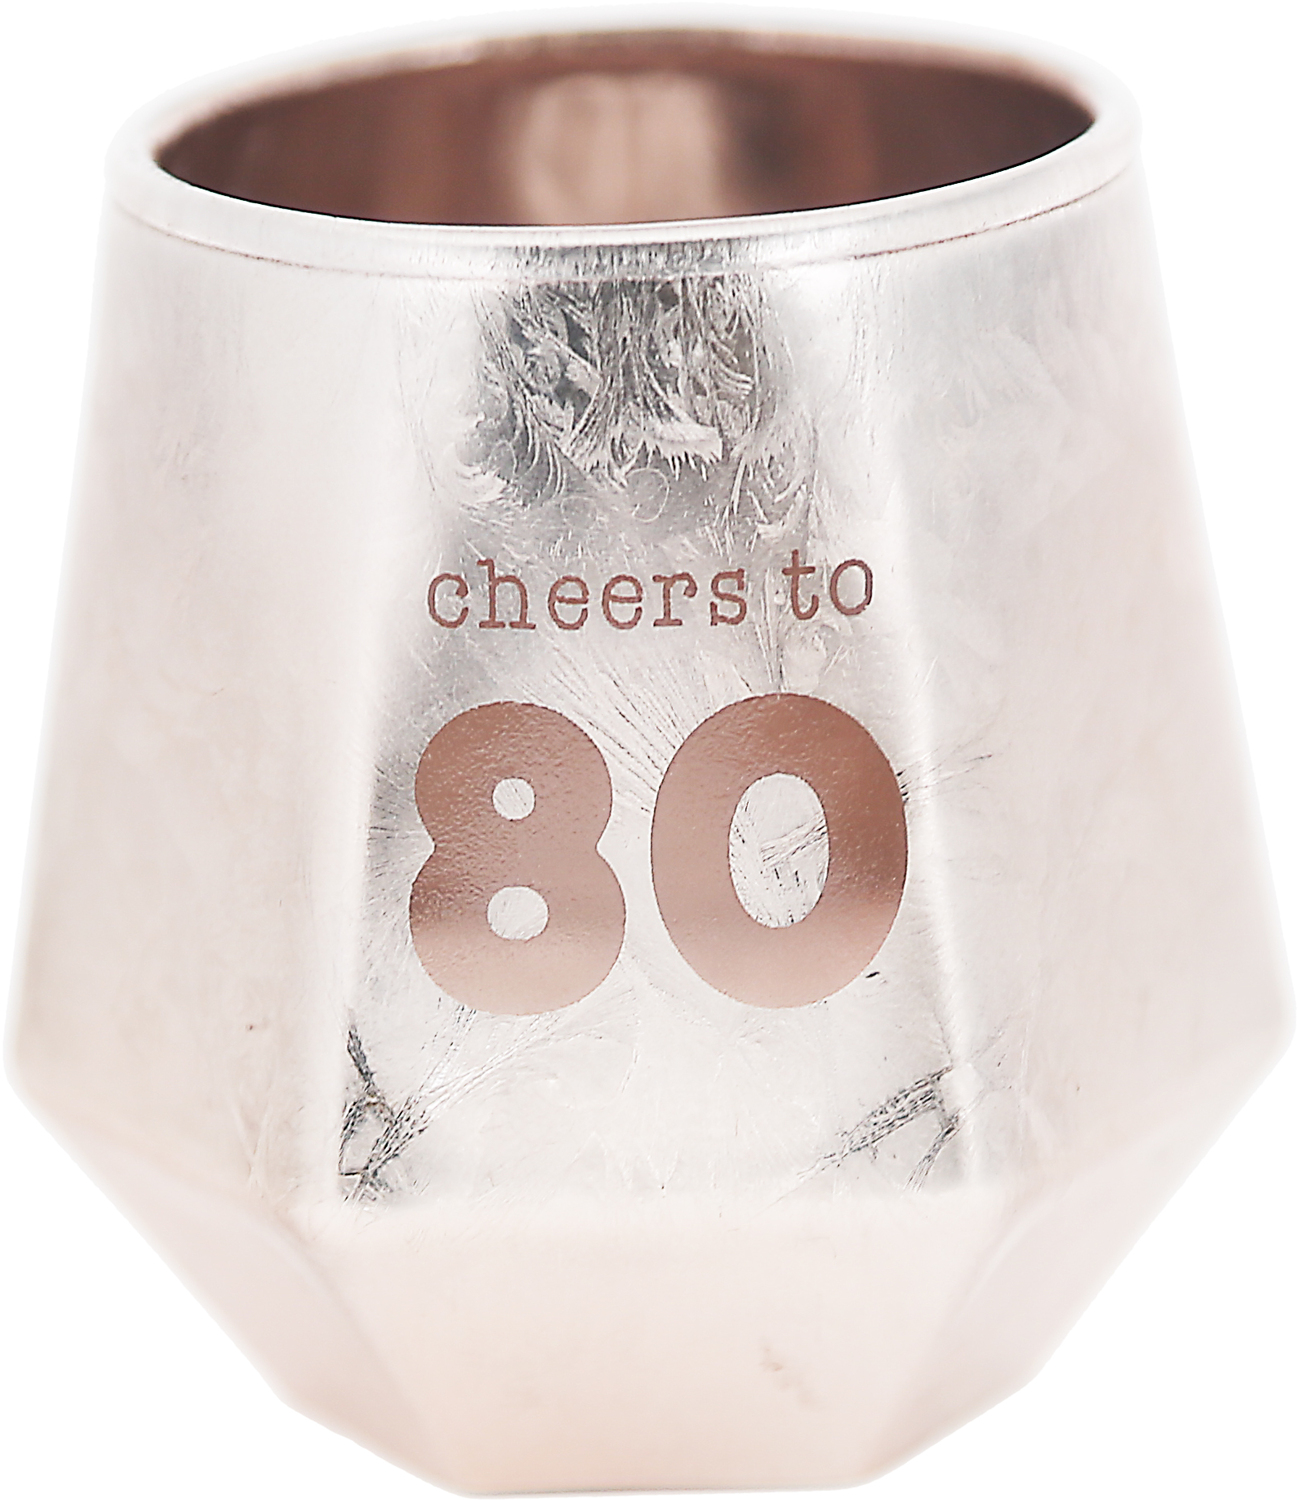 Cheers to 80 by Happy Confetti to You - Cheers to 80 - 3 oz Geometric Shot Glass